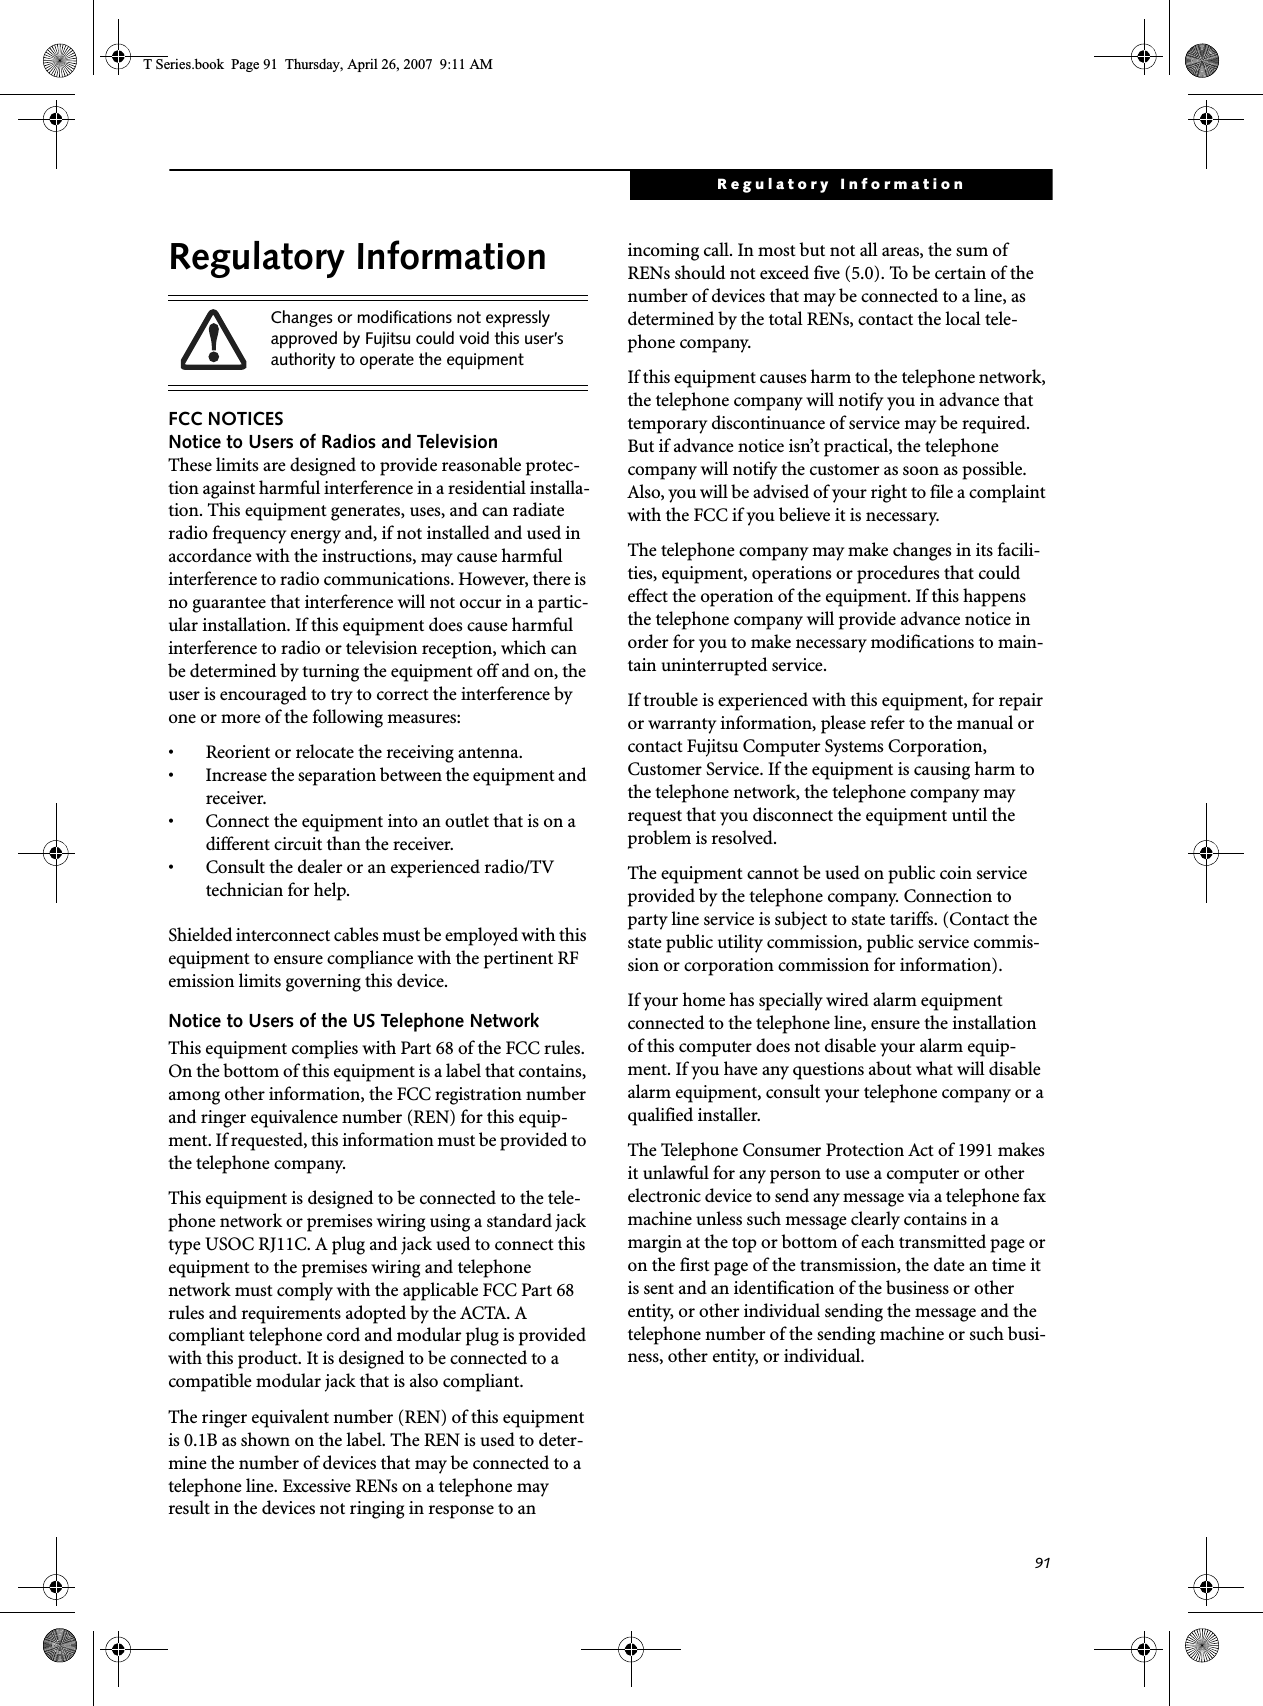 91Regulatory InformationRegulatory InformationFCC NOTICESNotice to Users of Radios and TelevisionThese limits are designed to provide reasonable protec-tion against harmful interference in a residential installa-tion. This equipment generates, uses, and can radiate radio frequency energy and, if not installed and used in accordance with the instructions, may cause harmful interference to radio communications. However, there is no guarantee that interference will not occur in a partic-ular installation. If this equipment does cause harmful interference to radio or television reception, which can be determined by turning the equipment off and on, the user is encouraged to try to correct the interference by one or more of the following measures:• Reorient or relocate the receiving antenna.• Increase the separation between the equipment and receiver.• Connect the equipment into an outlet that is on a different circuit than the receiver.• Consult the dealer or an experienced radio/TVtechnician for help.Shielded interconnect cables must be employed with this equipment to ensure compliance with the pertinent RF emission limits governing this device. Notice to Users of the US Telephone NetworkThis equipment complies with Part 68 of the FCC rules. On the bottom of this equipment is a label that contains, among other information, the FCC registration number and ringer equivalence number (REN) for this equip-ment. If requested, this information must be provided to the telephone company.This equipment is designed to be connected to the tele-phone network or premises wiring using a standard jack type USOC RJ11C. A plug and jack used to connect this equipment to the premises wiring and telephone network must comply with the applicable FCC Part 68 rules and requirements adopted by the ACTA. A compliant telephone cord and modular plug is provided with this product. It is designed to be connected to a compatible modular jack that is also compliant.The ringer equivalent number (REN) of this equipment is 0.1B as shown on the label. The REN is used to deter-mine the number of devices that may be connected to a telephone line. Excessive RENs on a telephone may result in the devices not ringing in response to an incoming call. In most but not all areas, the sum of RENs should not exceed five (5.0). To be certain of the number of devices that may be connected to a line, as determined by the total RENs, contact the local tele-phone company. If this equipment causes harm to the telephone network, the telephone company will notify you in advance that temporary discontinuance of service may be required. But if advance notice isn’t practical, the telephone company will notify the customer as soon as possible. Also, you will be advised of your right to file a complaint with the FCC if you believe it is necessary.The telephone company may make changes in its facili-ties, equipment, operations or procedures that could effect the operation of the equipment. If this happens the telephone company will provide advance notice in order for you to make necessary modifications to main-tain uninterrupted service. If trouble is experienced with this equipment, for repair or warranty information, please refer to the manual or contact Fujitsu Computer Systems Corporation, Customer Service. If the equipment is causing harm to the telephone network, the telephone company may request that you disconnect the equipment until the problem is resolved.The equipment cannot be used on public coin service provided by the telephone company. Connection to party line service is subject to state tariffs. (Contact the state public utility commission, public service commis-sion or corporation commission for information). If your home has specially wired alarm equipment connected to the telephone line, ensure the installation of this computer does not disable your alarm equip-ment. If you have any questions about what will disable alarm equipment, consult your telephone company or a qualified installer.The Telephone Consumer Protection Act of 1991 makes it unlawful for any person to use a computer or other electronic device to send any message via a telephone fax machine unless such message clearly contains in a margin at the top or bottom of each transmitted page or on the first page of the transmission, the date an time it is sent and an identification of the business or other entity, or other individual sending the message and the telephone number of the sending machine or such busi-ness, other entity, or individual.Changes or modifications not expressly approved by Fujitsu could void this user’s authority to operate the equipmentT Series.book  Page 91  Thursday, April 26, 2007  9:11 AM